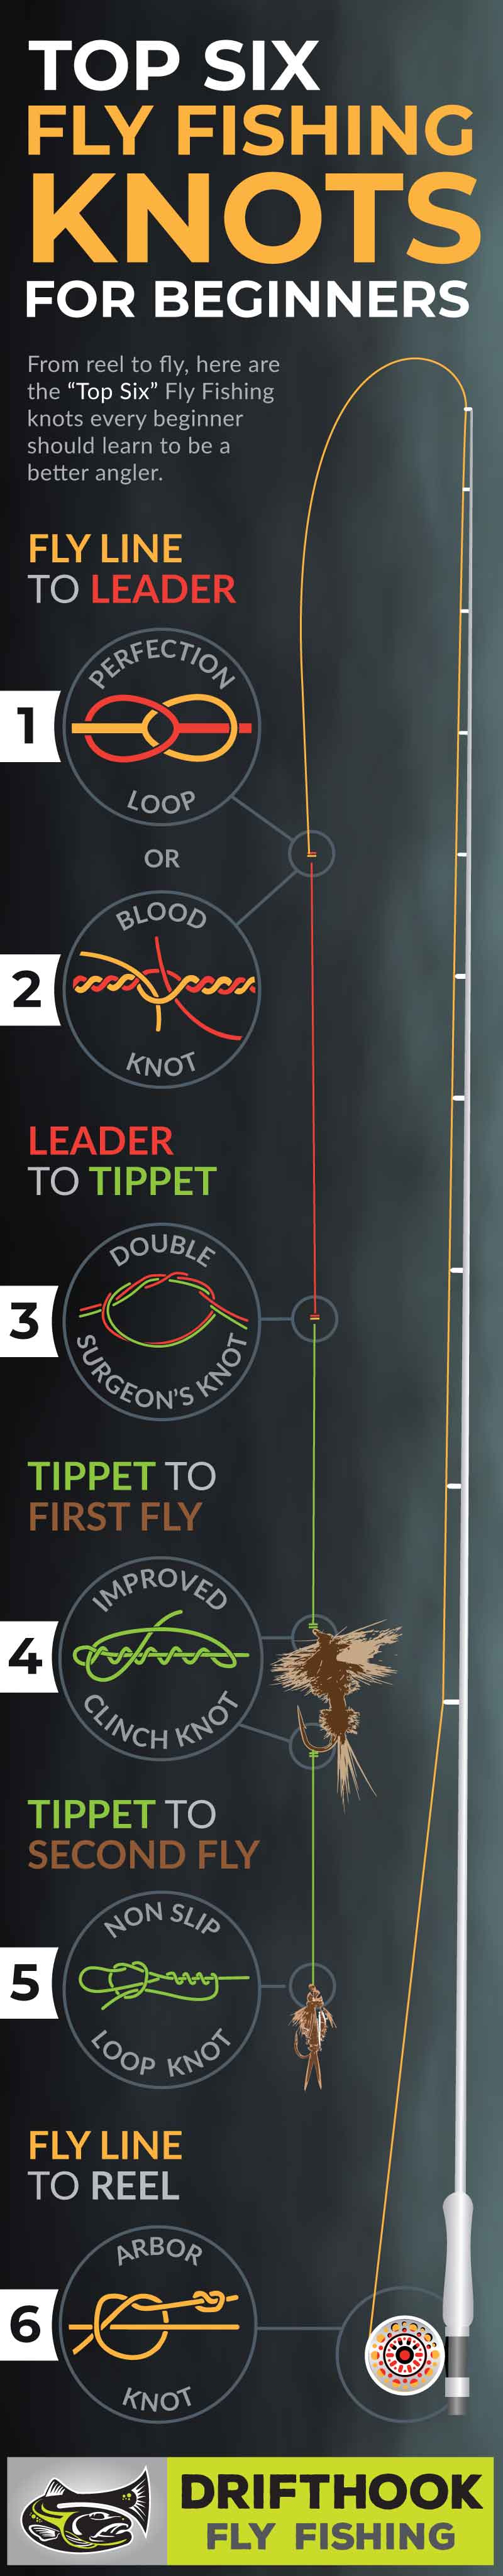 HOW TO TIE FLY FISHING KNOTS